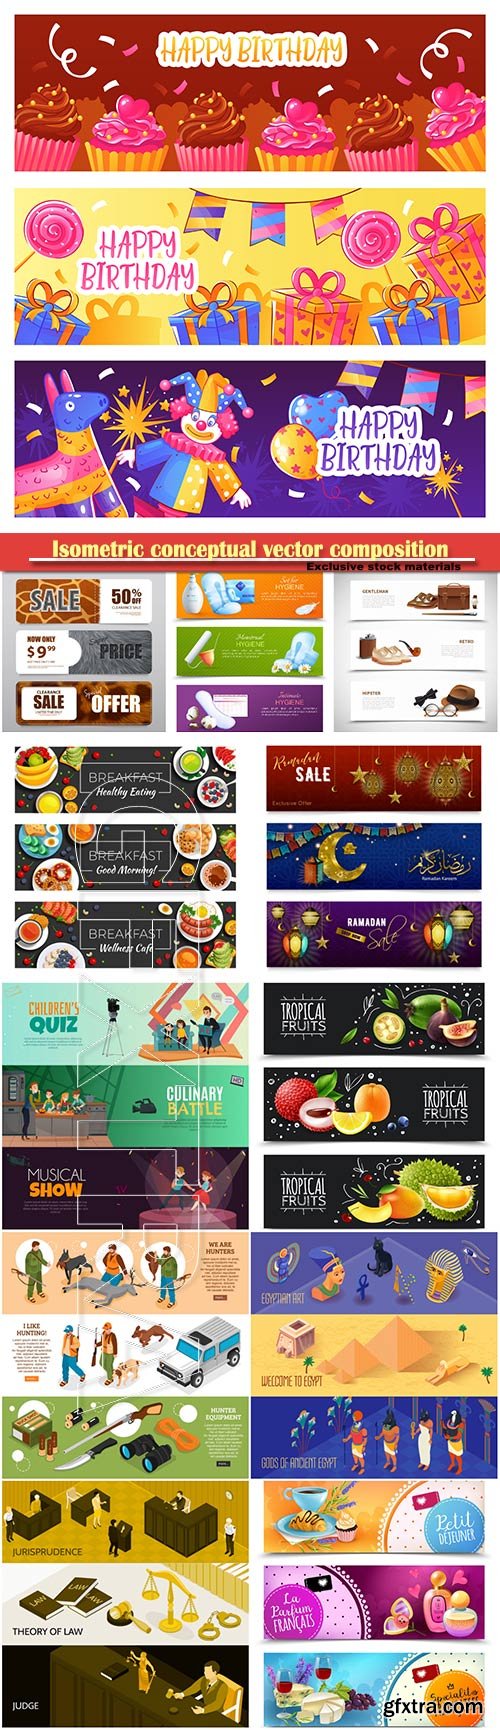 Isometric conceptual vector composition, infographics template, horizontal banners set